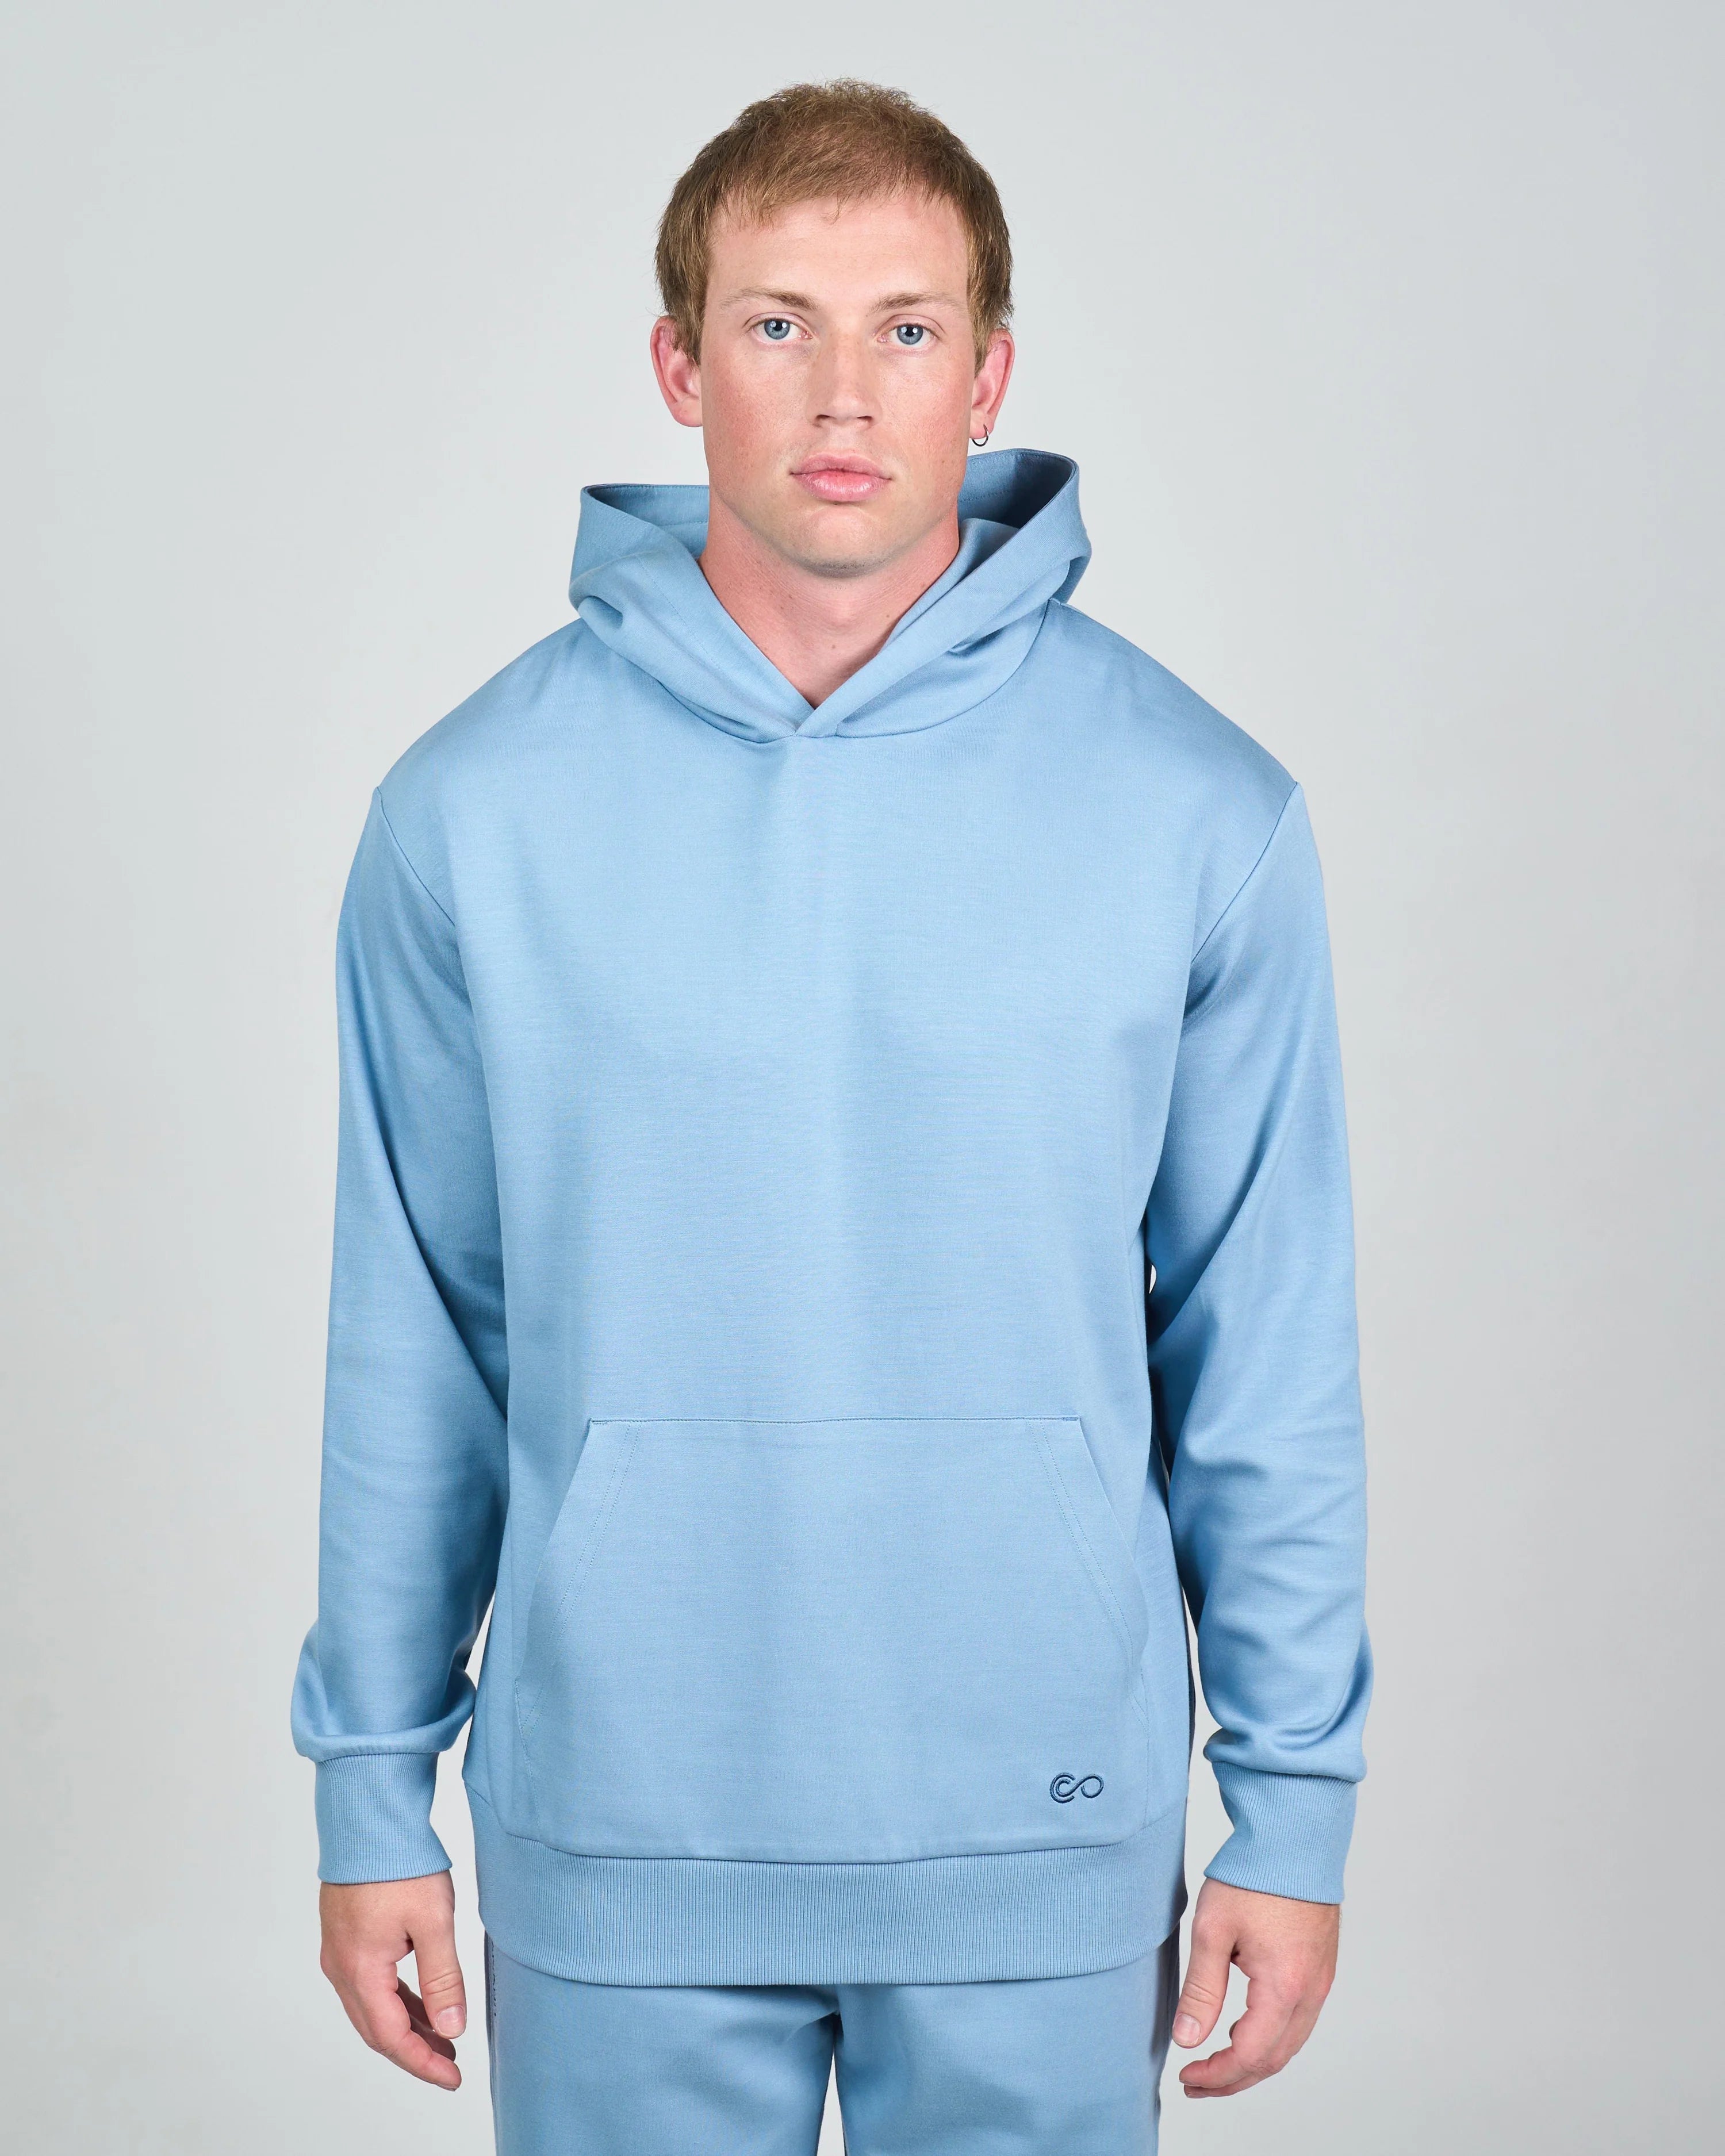 comfiknit-sky-hoodie-placid-blue-front2-male